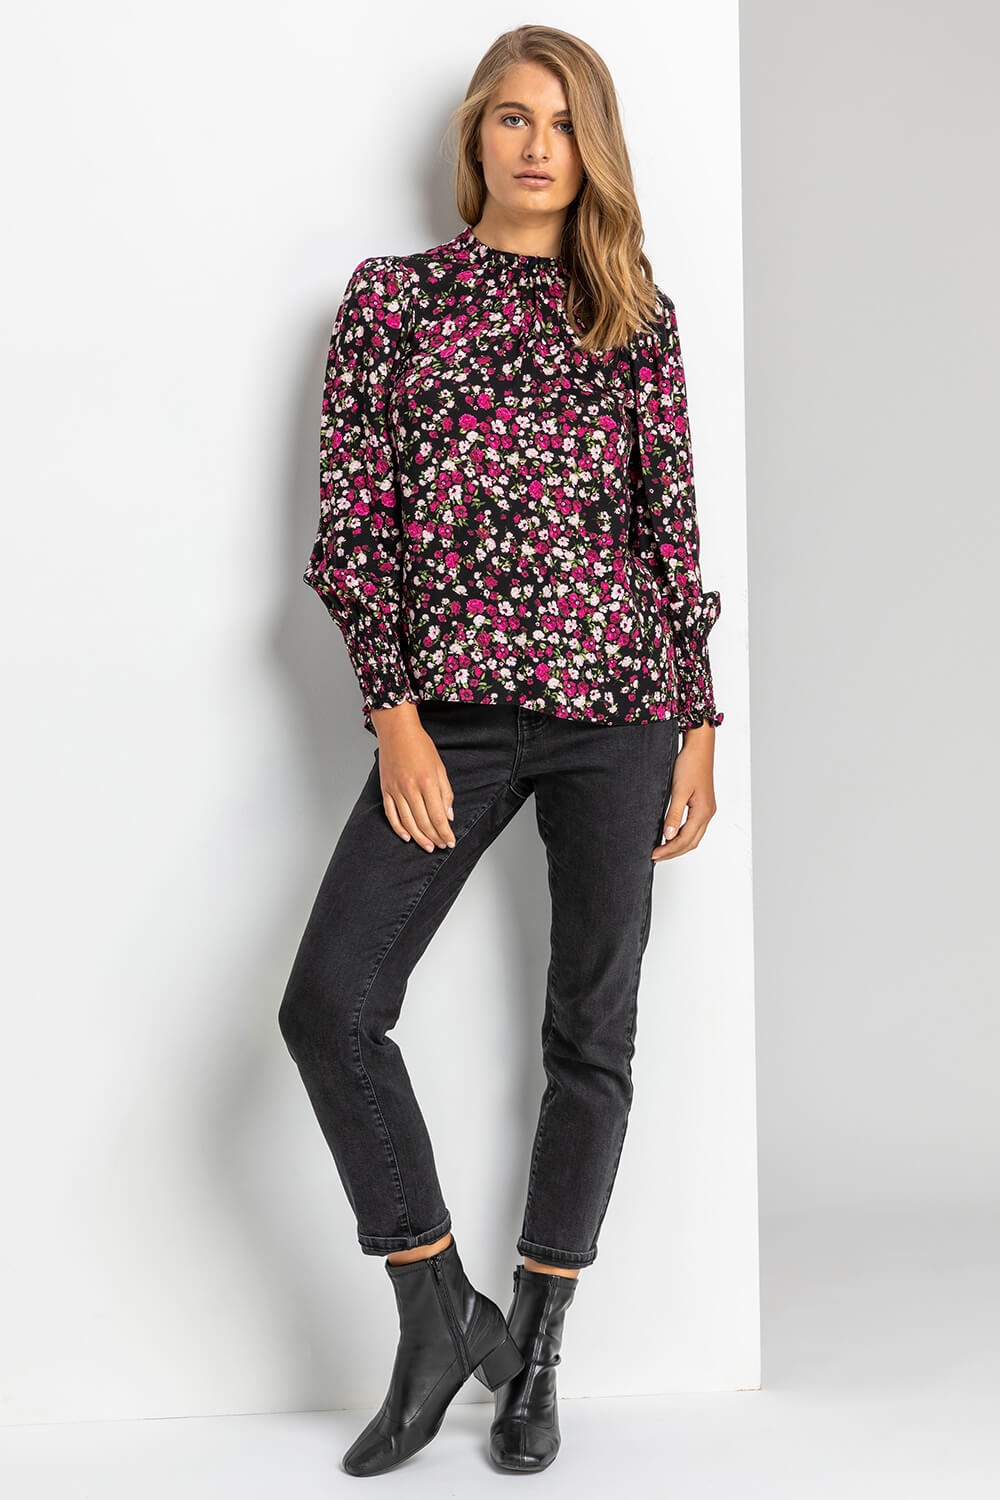 Black Ditsy Floral Frill Neck Blouse, Image 3 of 4